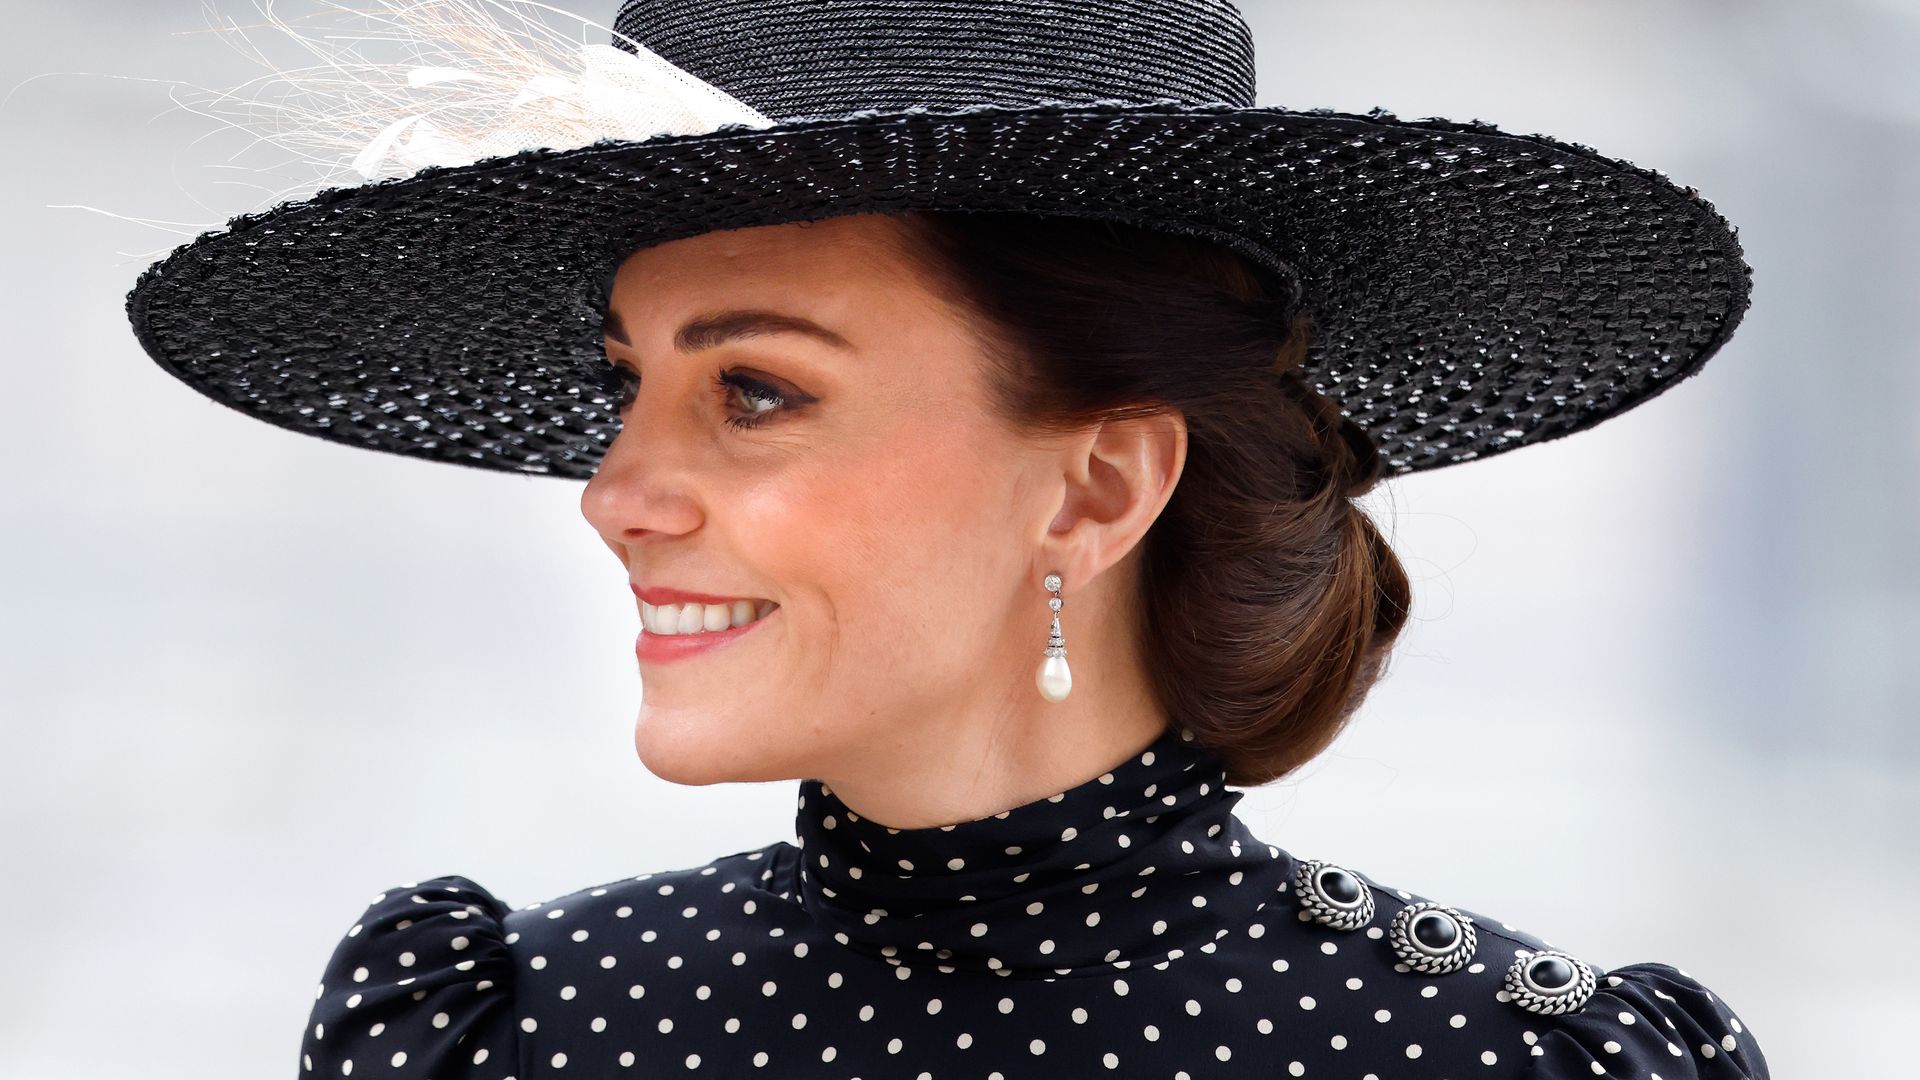 Kate Middleton Carries Two DeMellier Bags